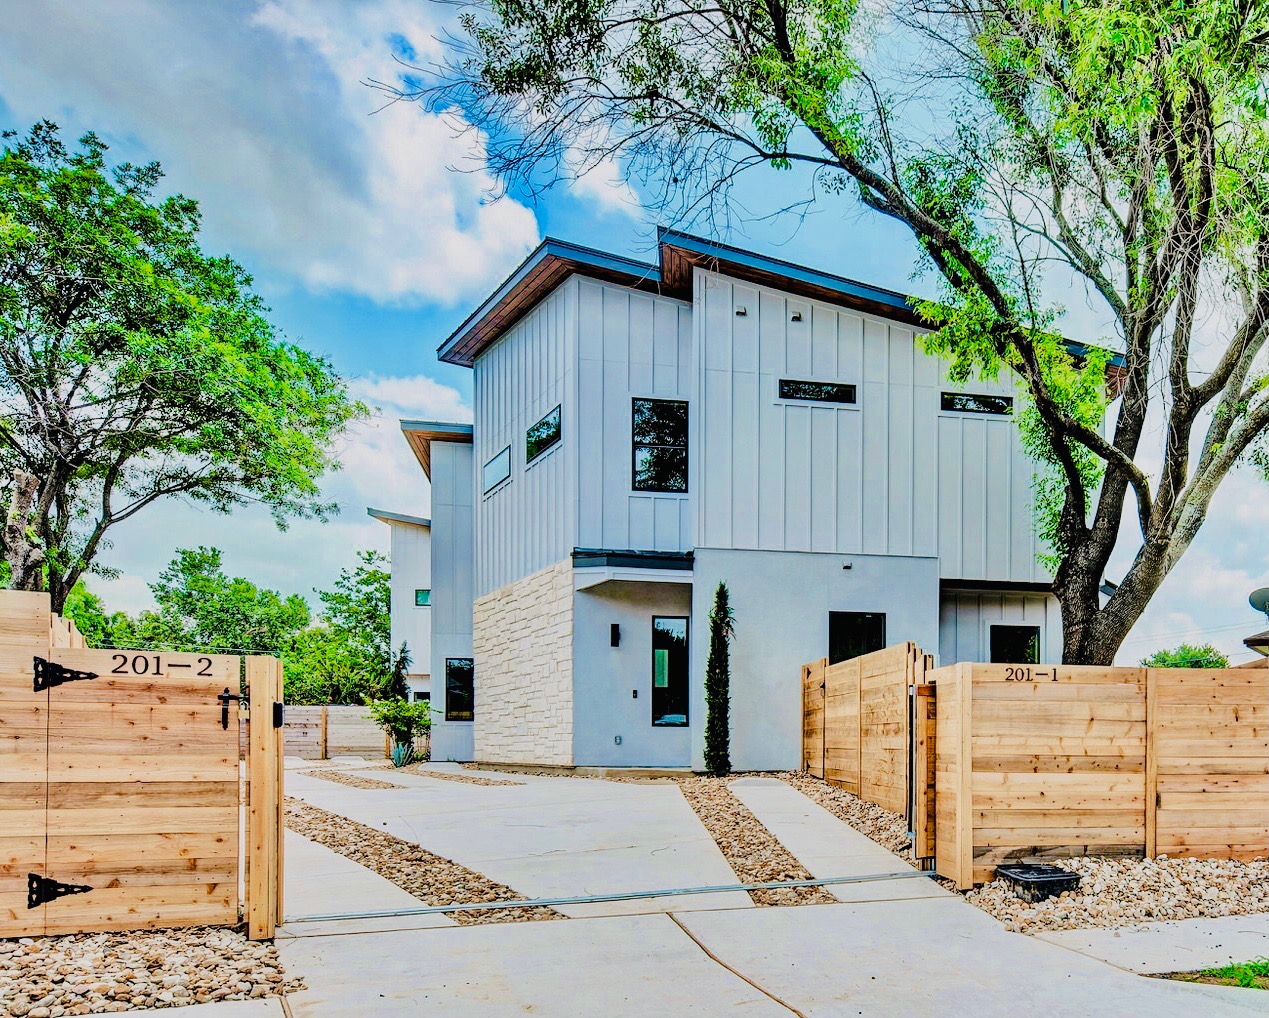 The 201 Tillery Square, Building 1 is ready for move in and is an exciting new modern home with 2 Bedrooms, 2.5 Bathrooms, and its own Carport.